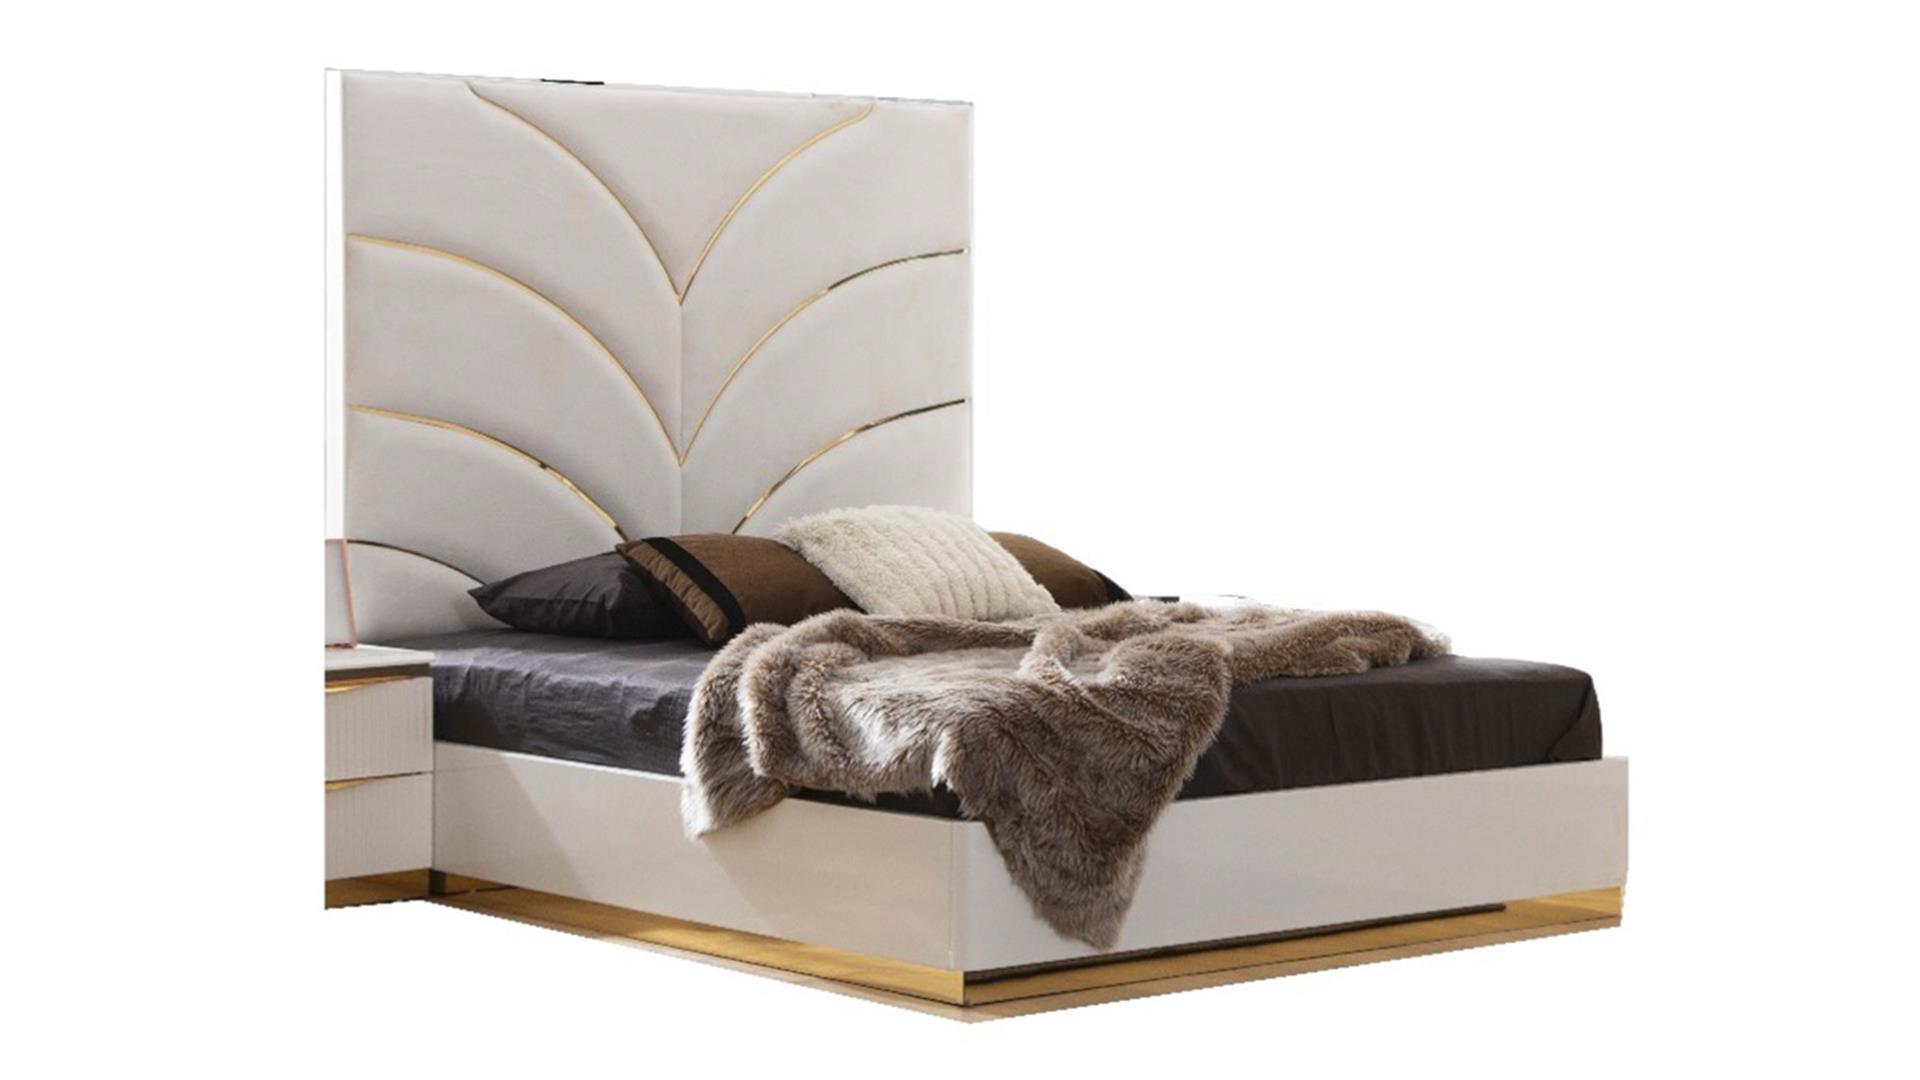 

    
Glam White & Gold King Bed Set 5Pcs LAURA Galaxy Home Contemporary Luxury
